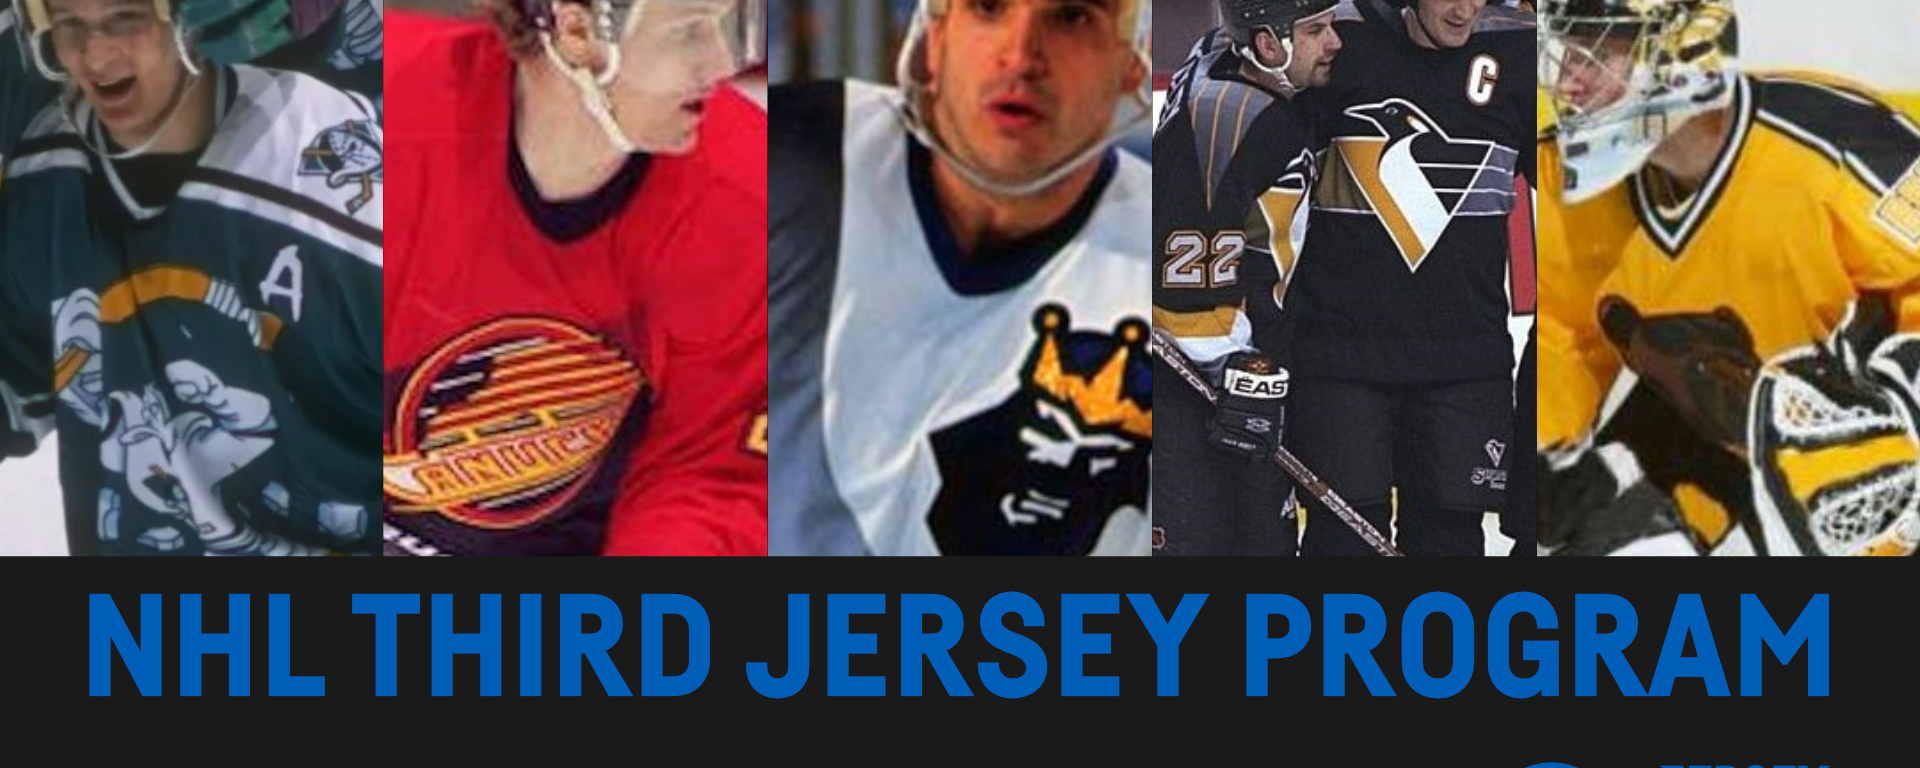 SJ Exec Casts Doubt on Leaked 4th Jerseys; NHL to Release in November